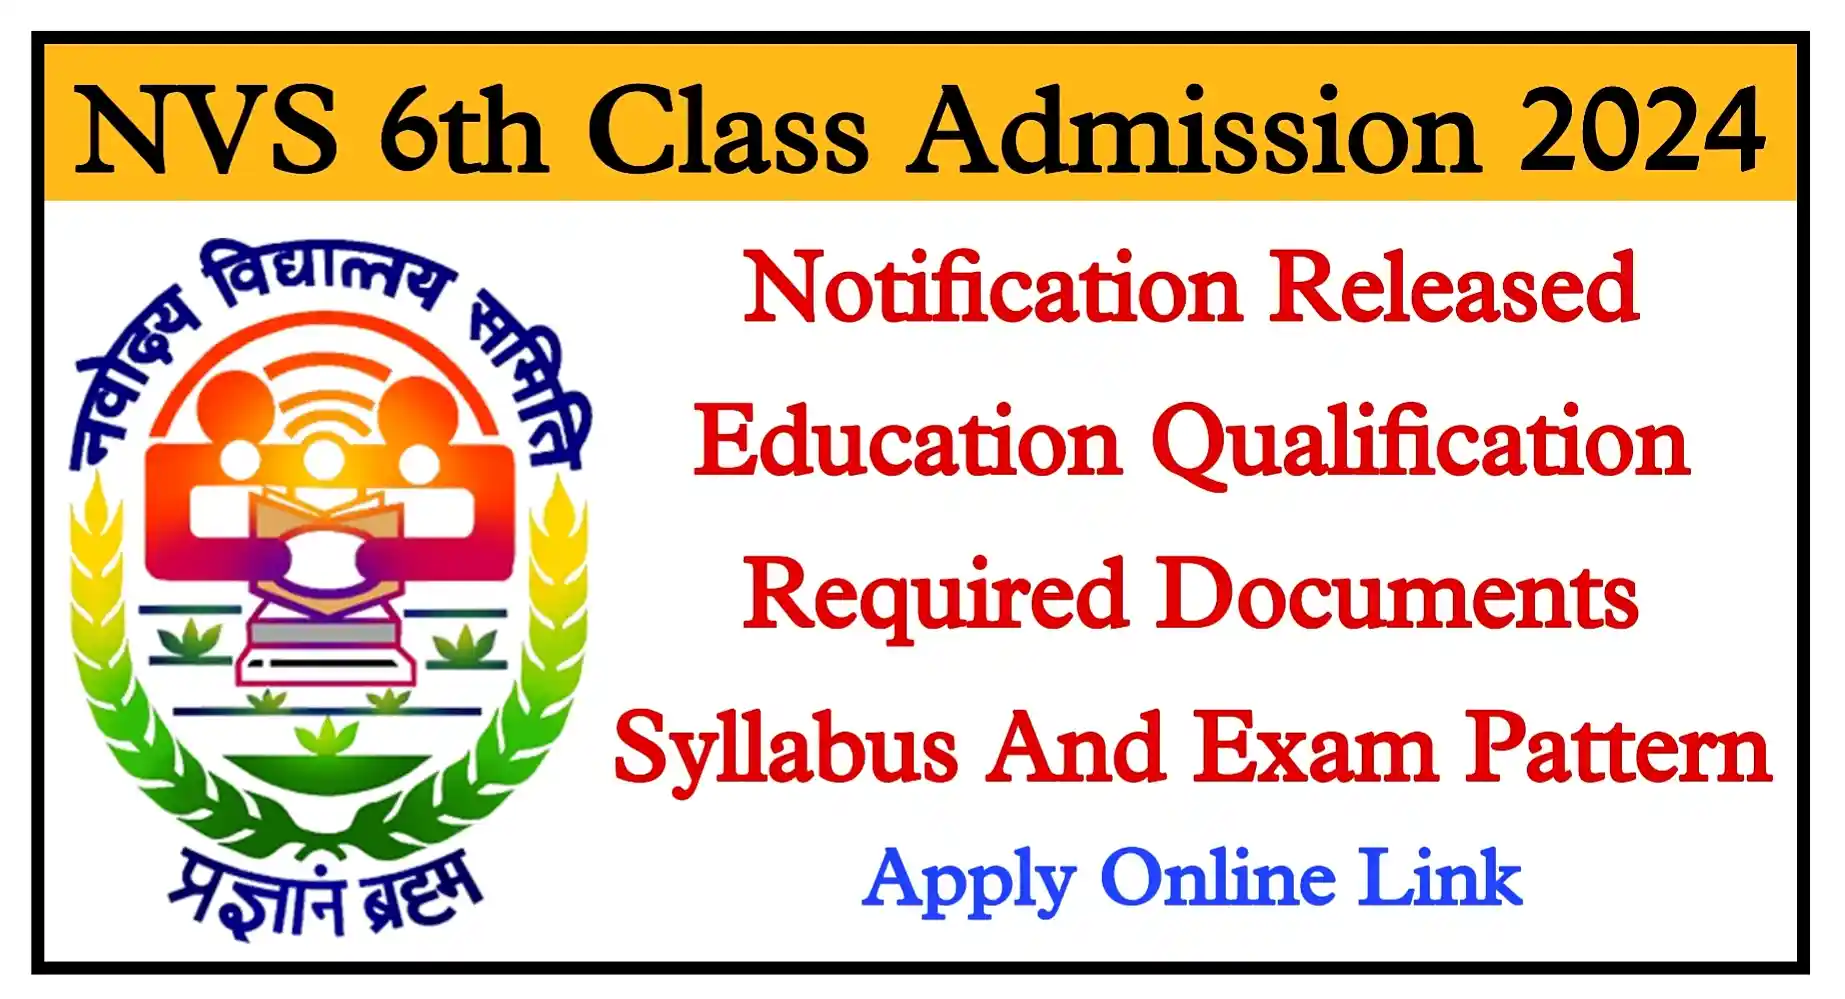 NVS 6th Class Admission 2024 Notification, Apply Online, Exam Date